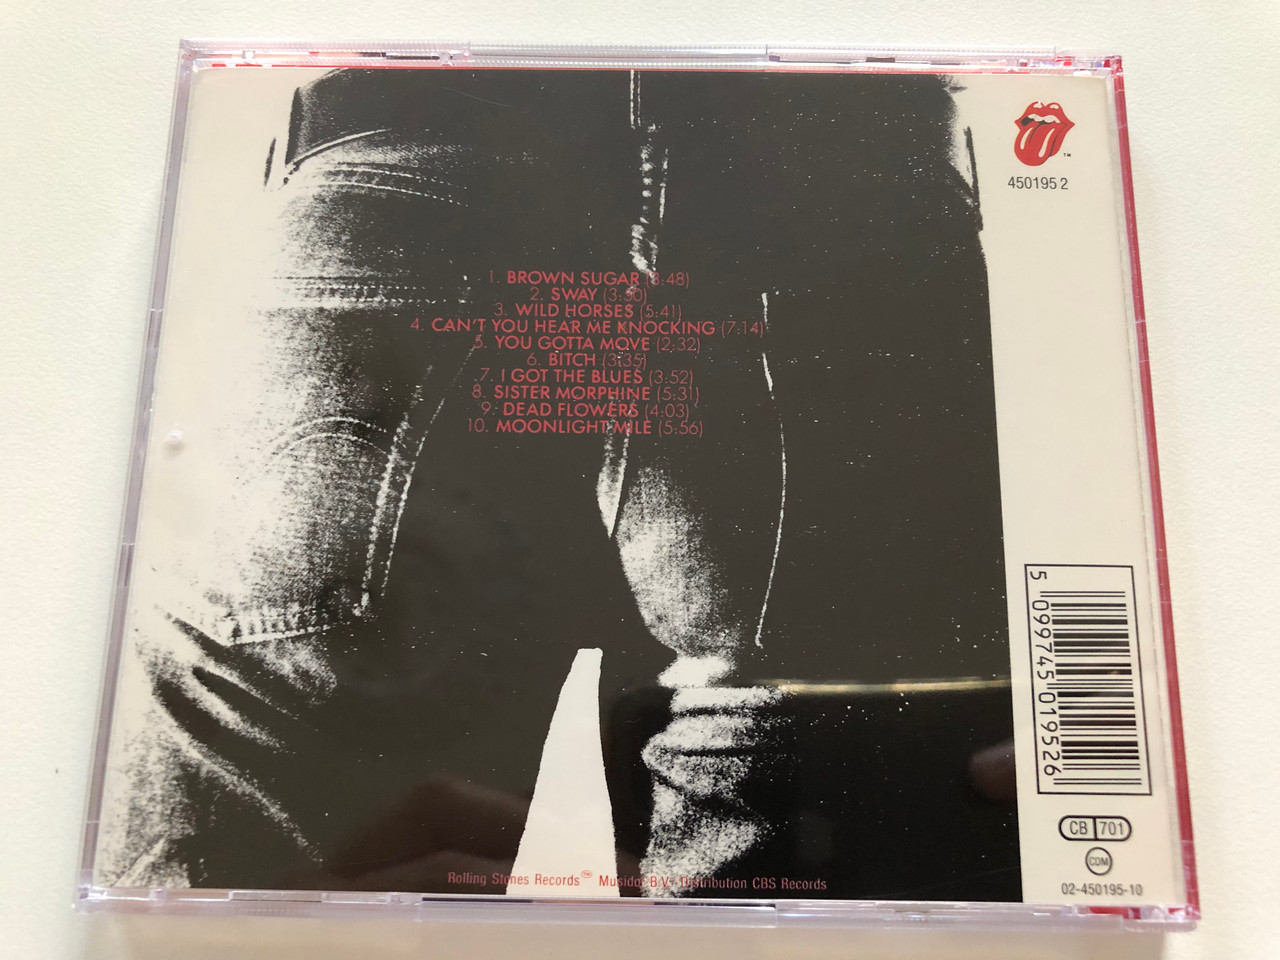 https://cdn10.bigcommerce.com/s-62bdpkt7pb/products/31167/images/183478/The_Rolling_Stones_Sticky_Fingers_Rolling_Stones_Records_Audio_CD_Stereo_CBS_450195_2_4__94301.1625591149.1280.1280.JPG?c=2